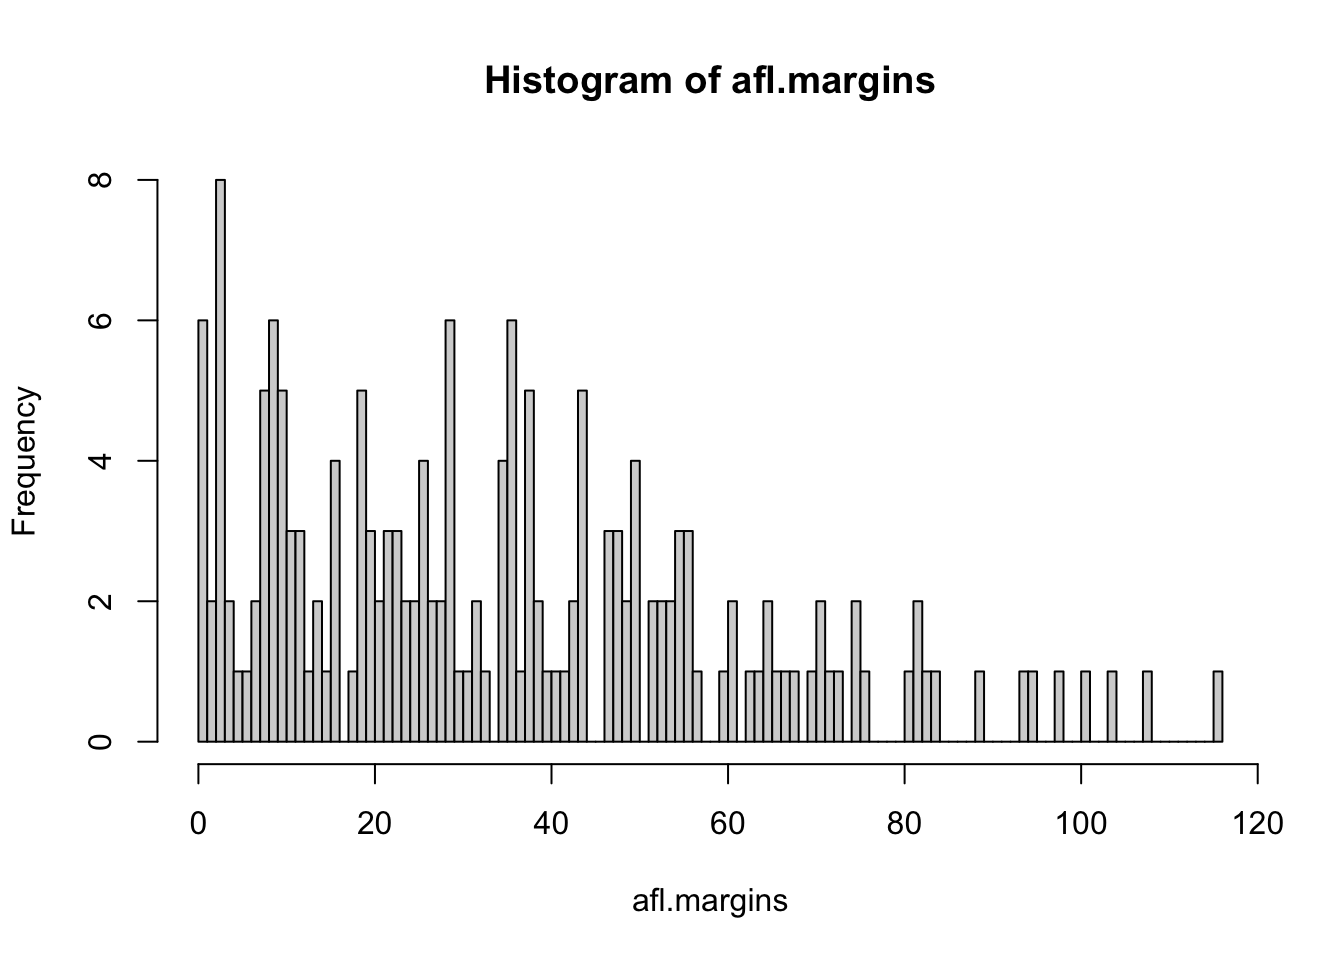 A histogram with too many bins